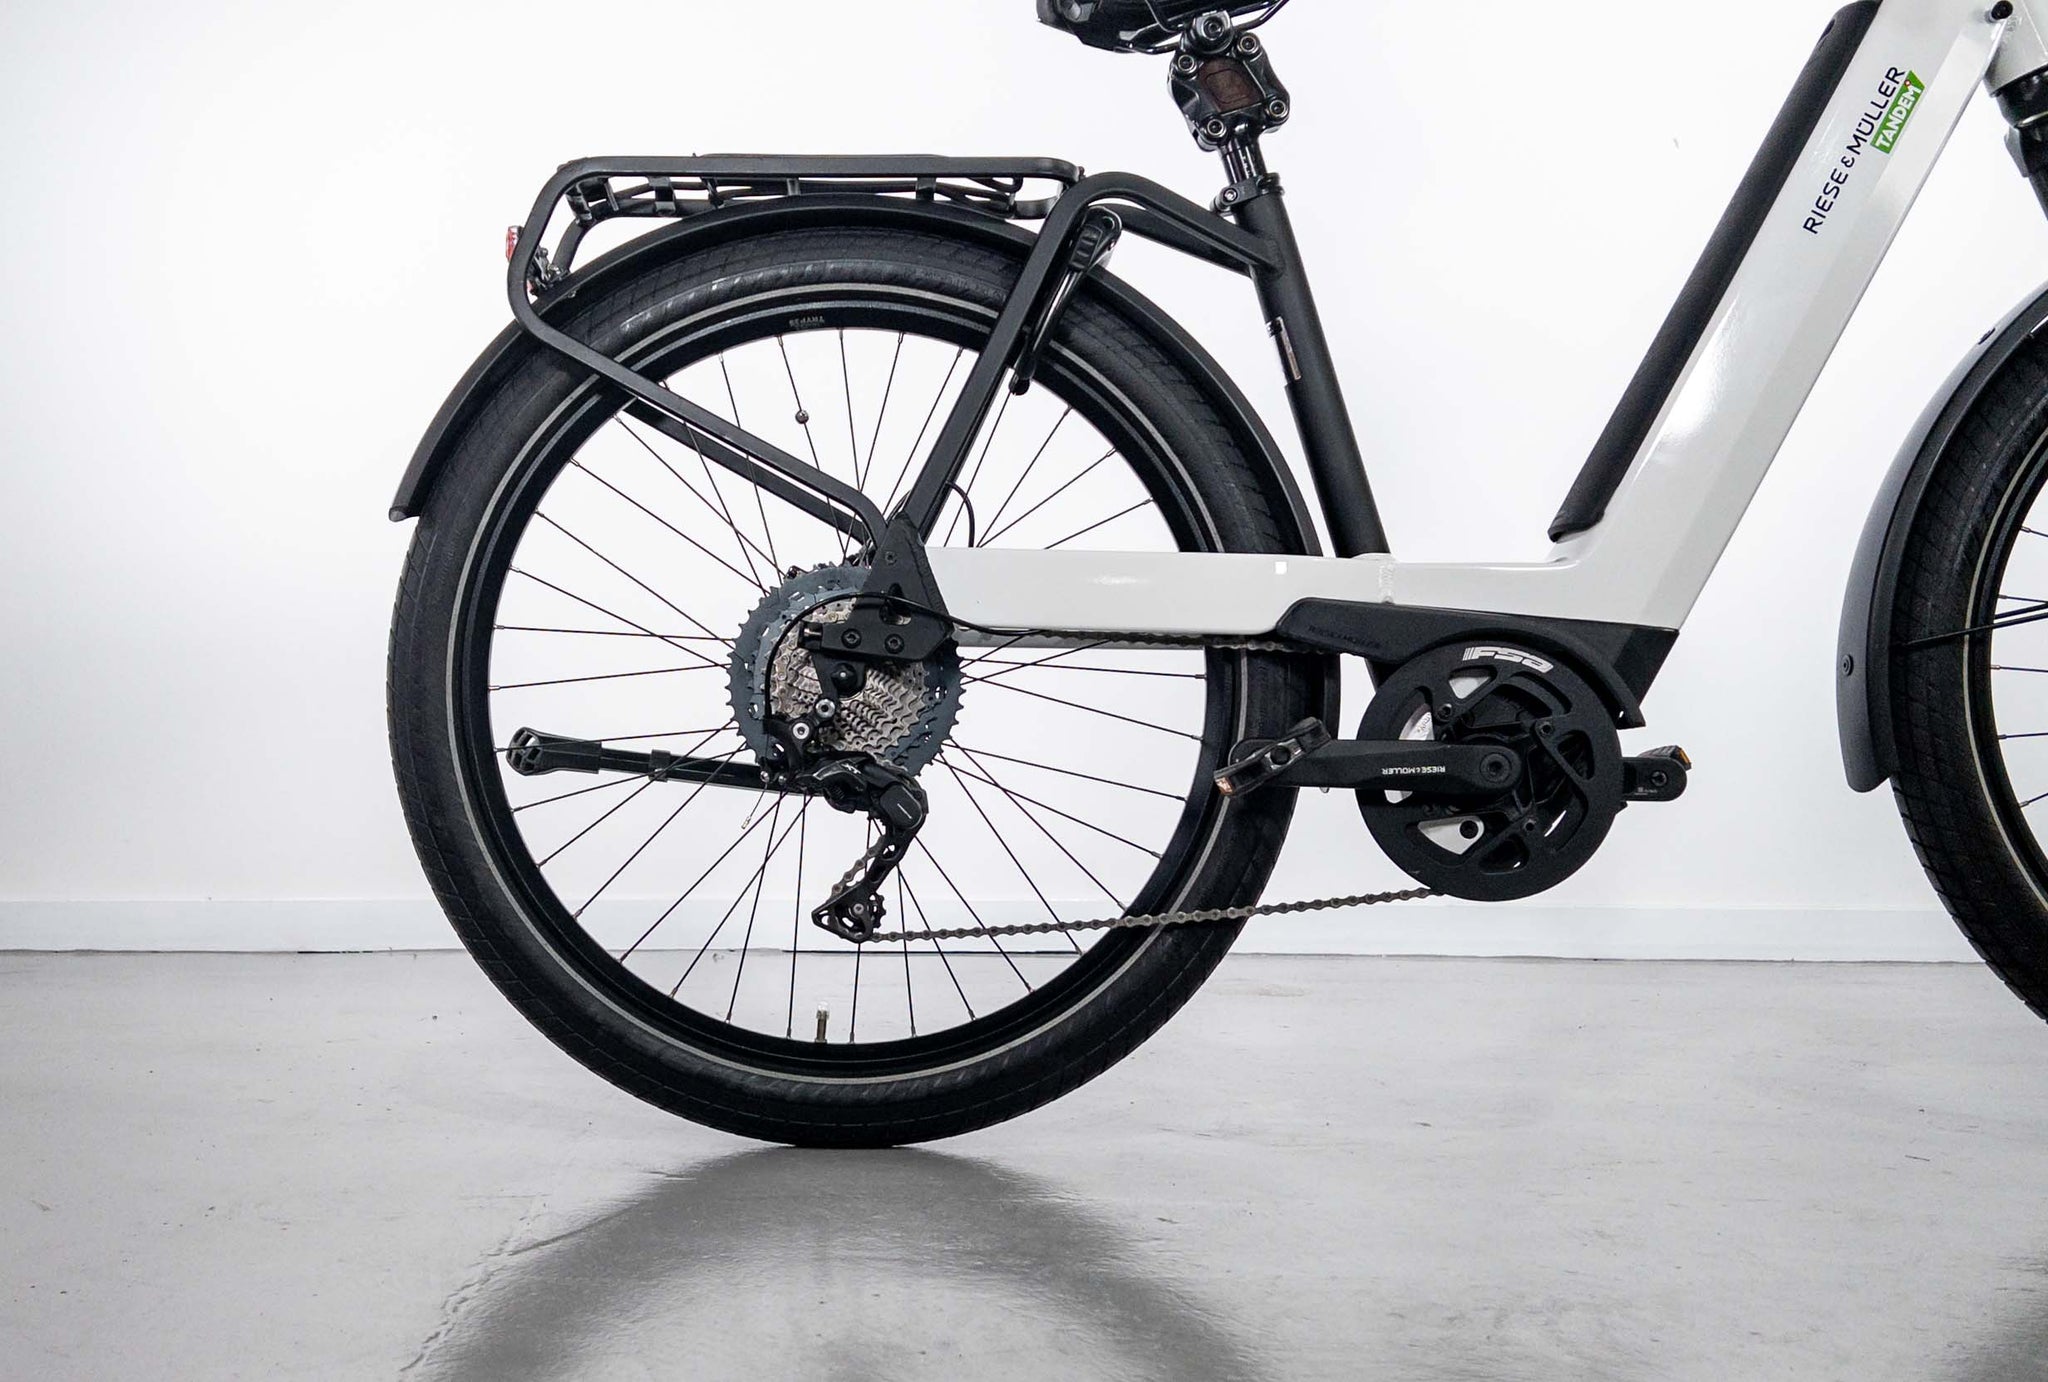 Riese & Muller Nevo 3 GT Touring Electric Hybrid Bike 2021